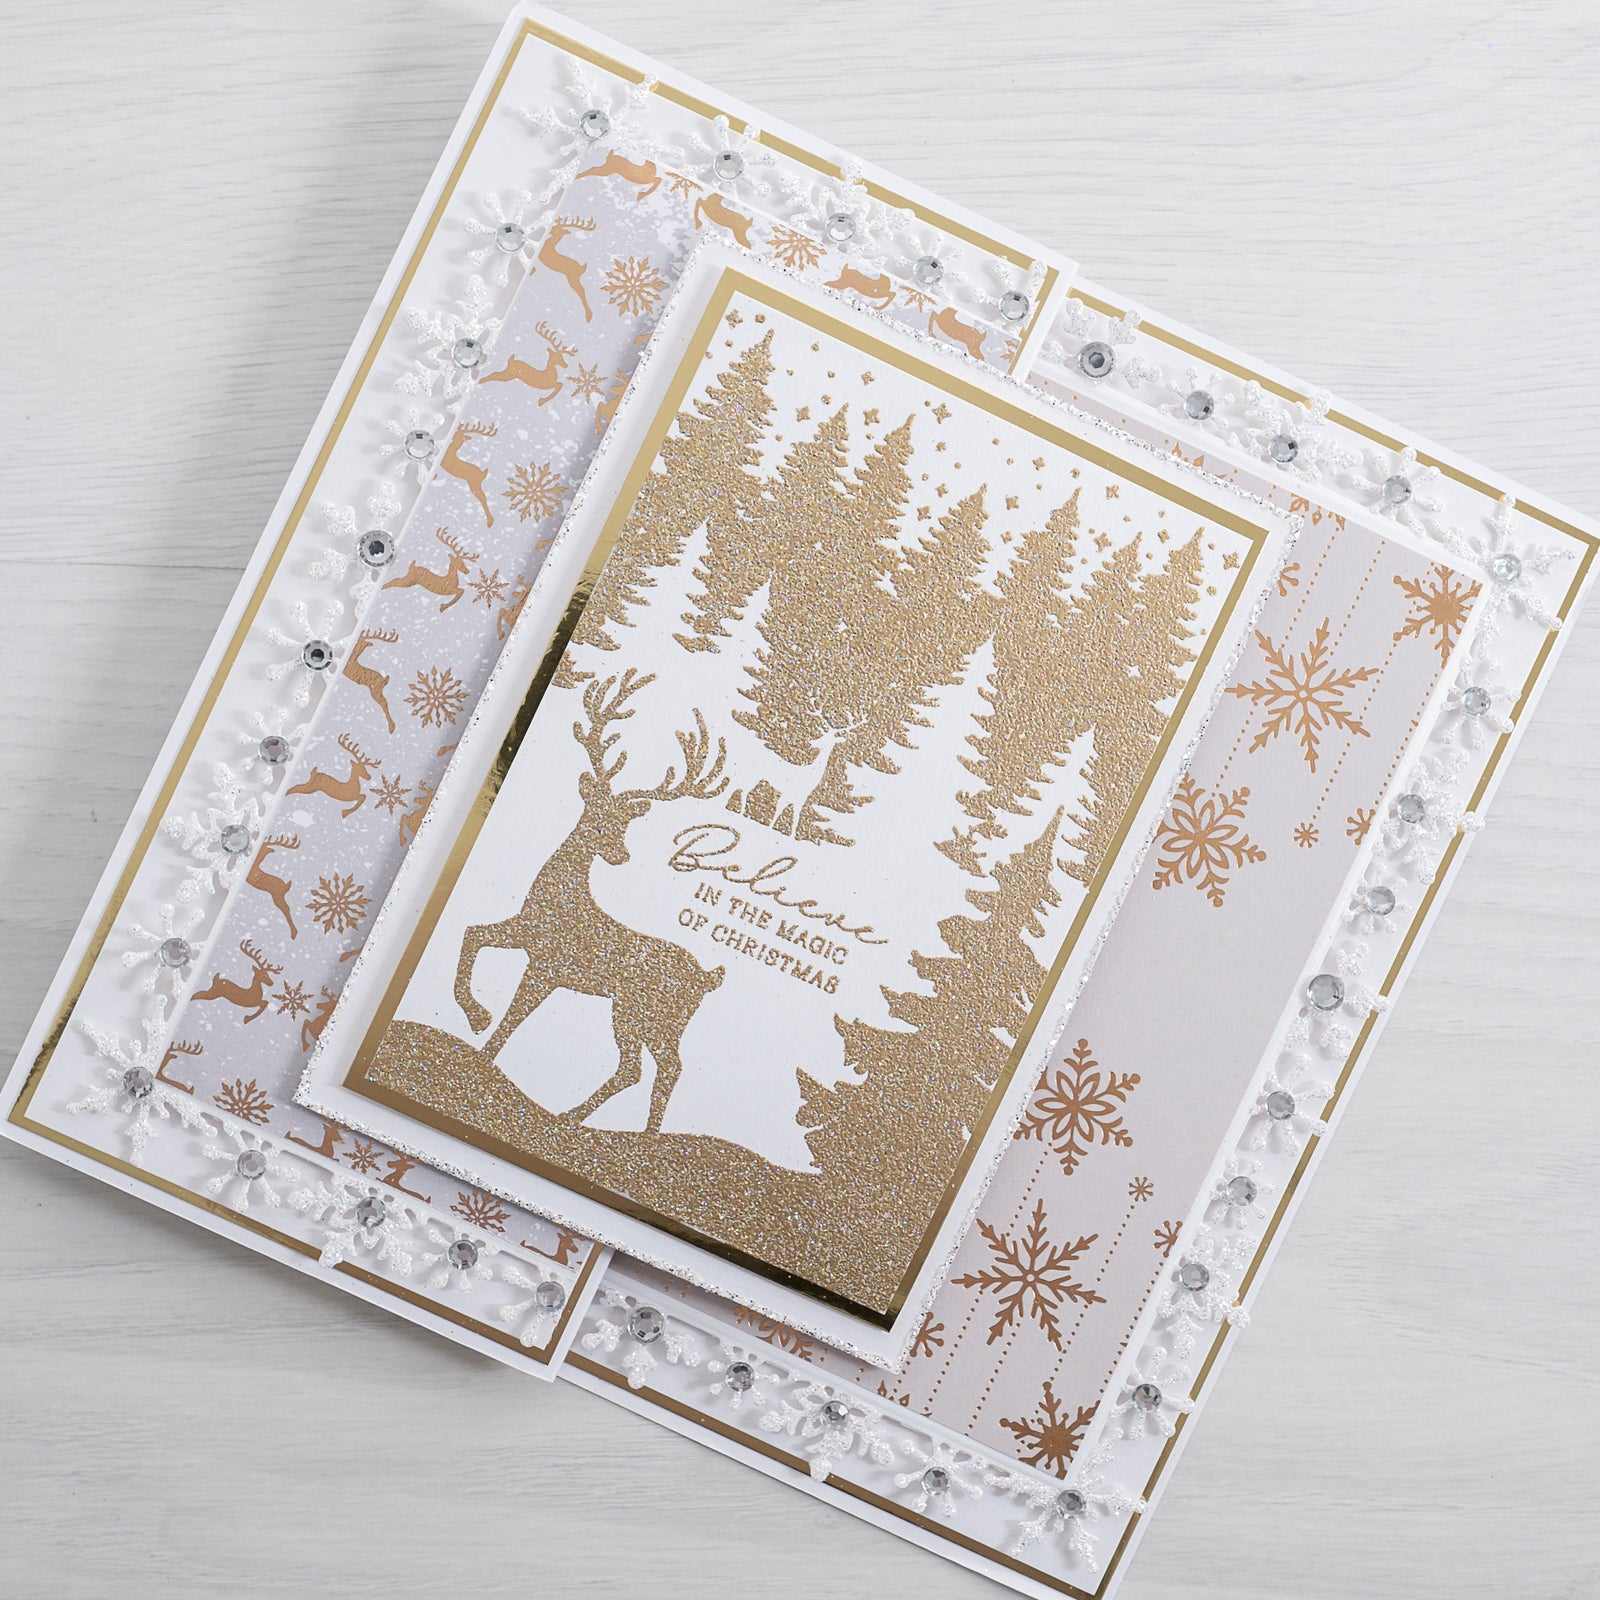 Learn how to make your own gold Christmas Card at home with this quick and easy tutorial from Chloes Creative Cards.